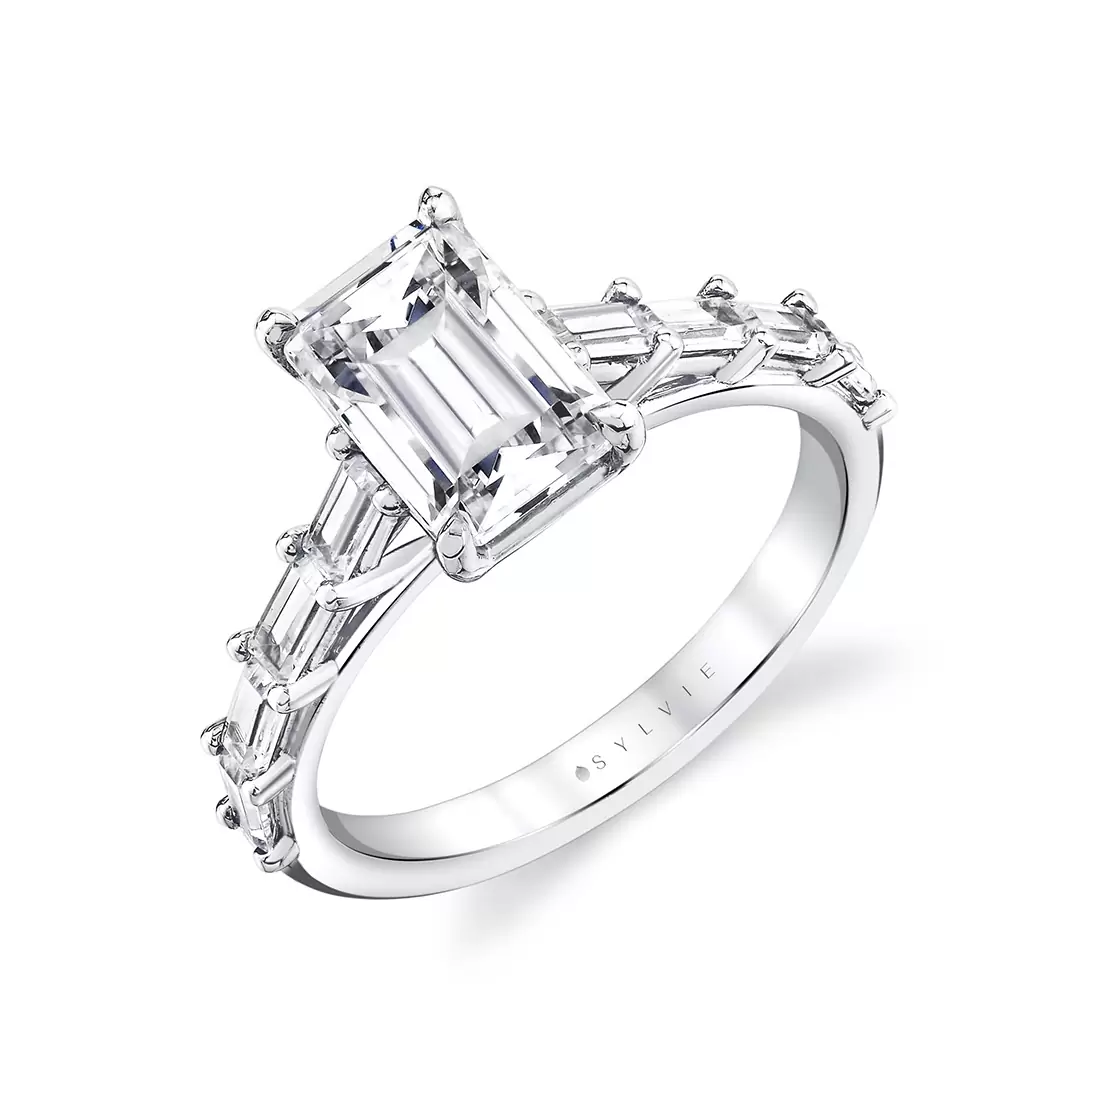 iconelle graduated baguette engagement ring